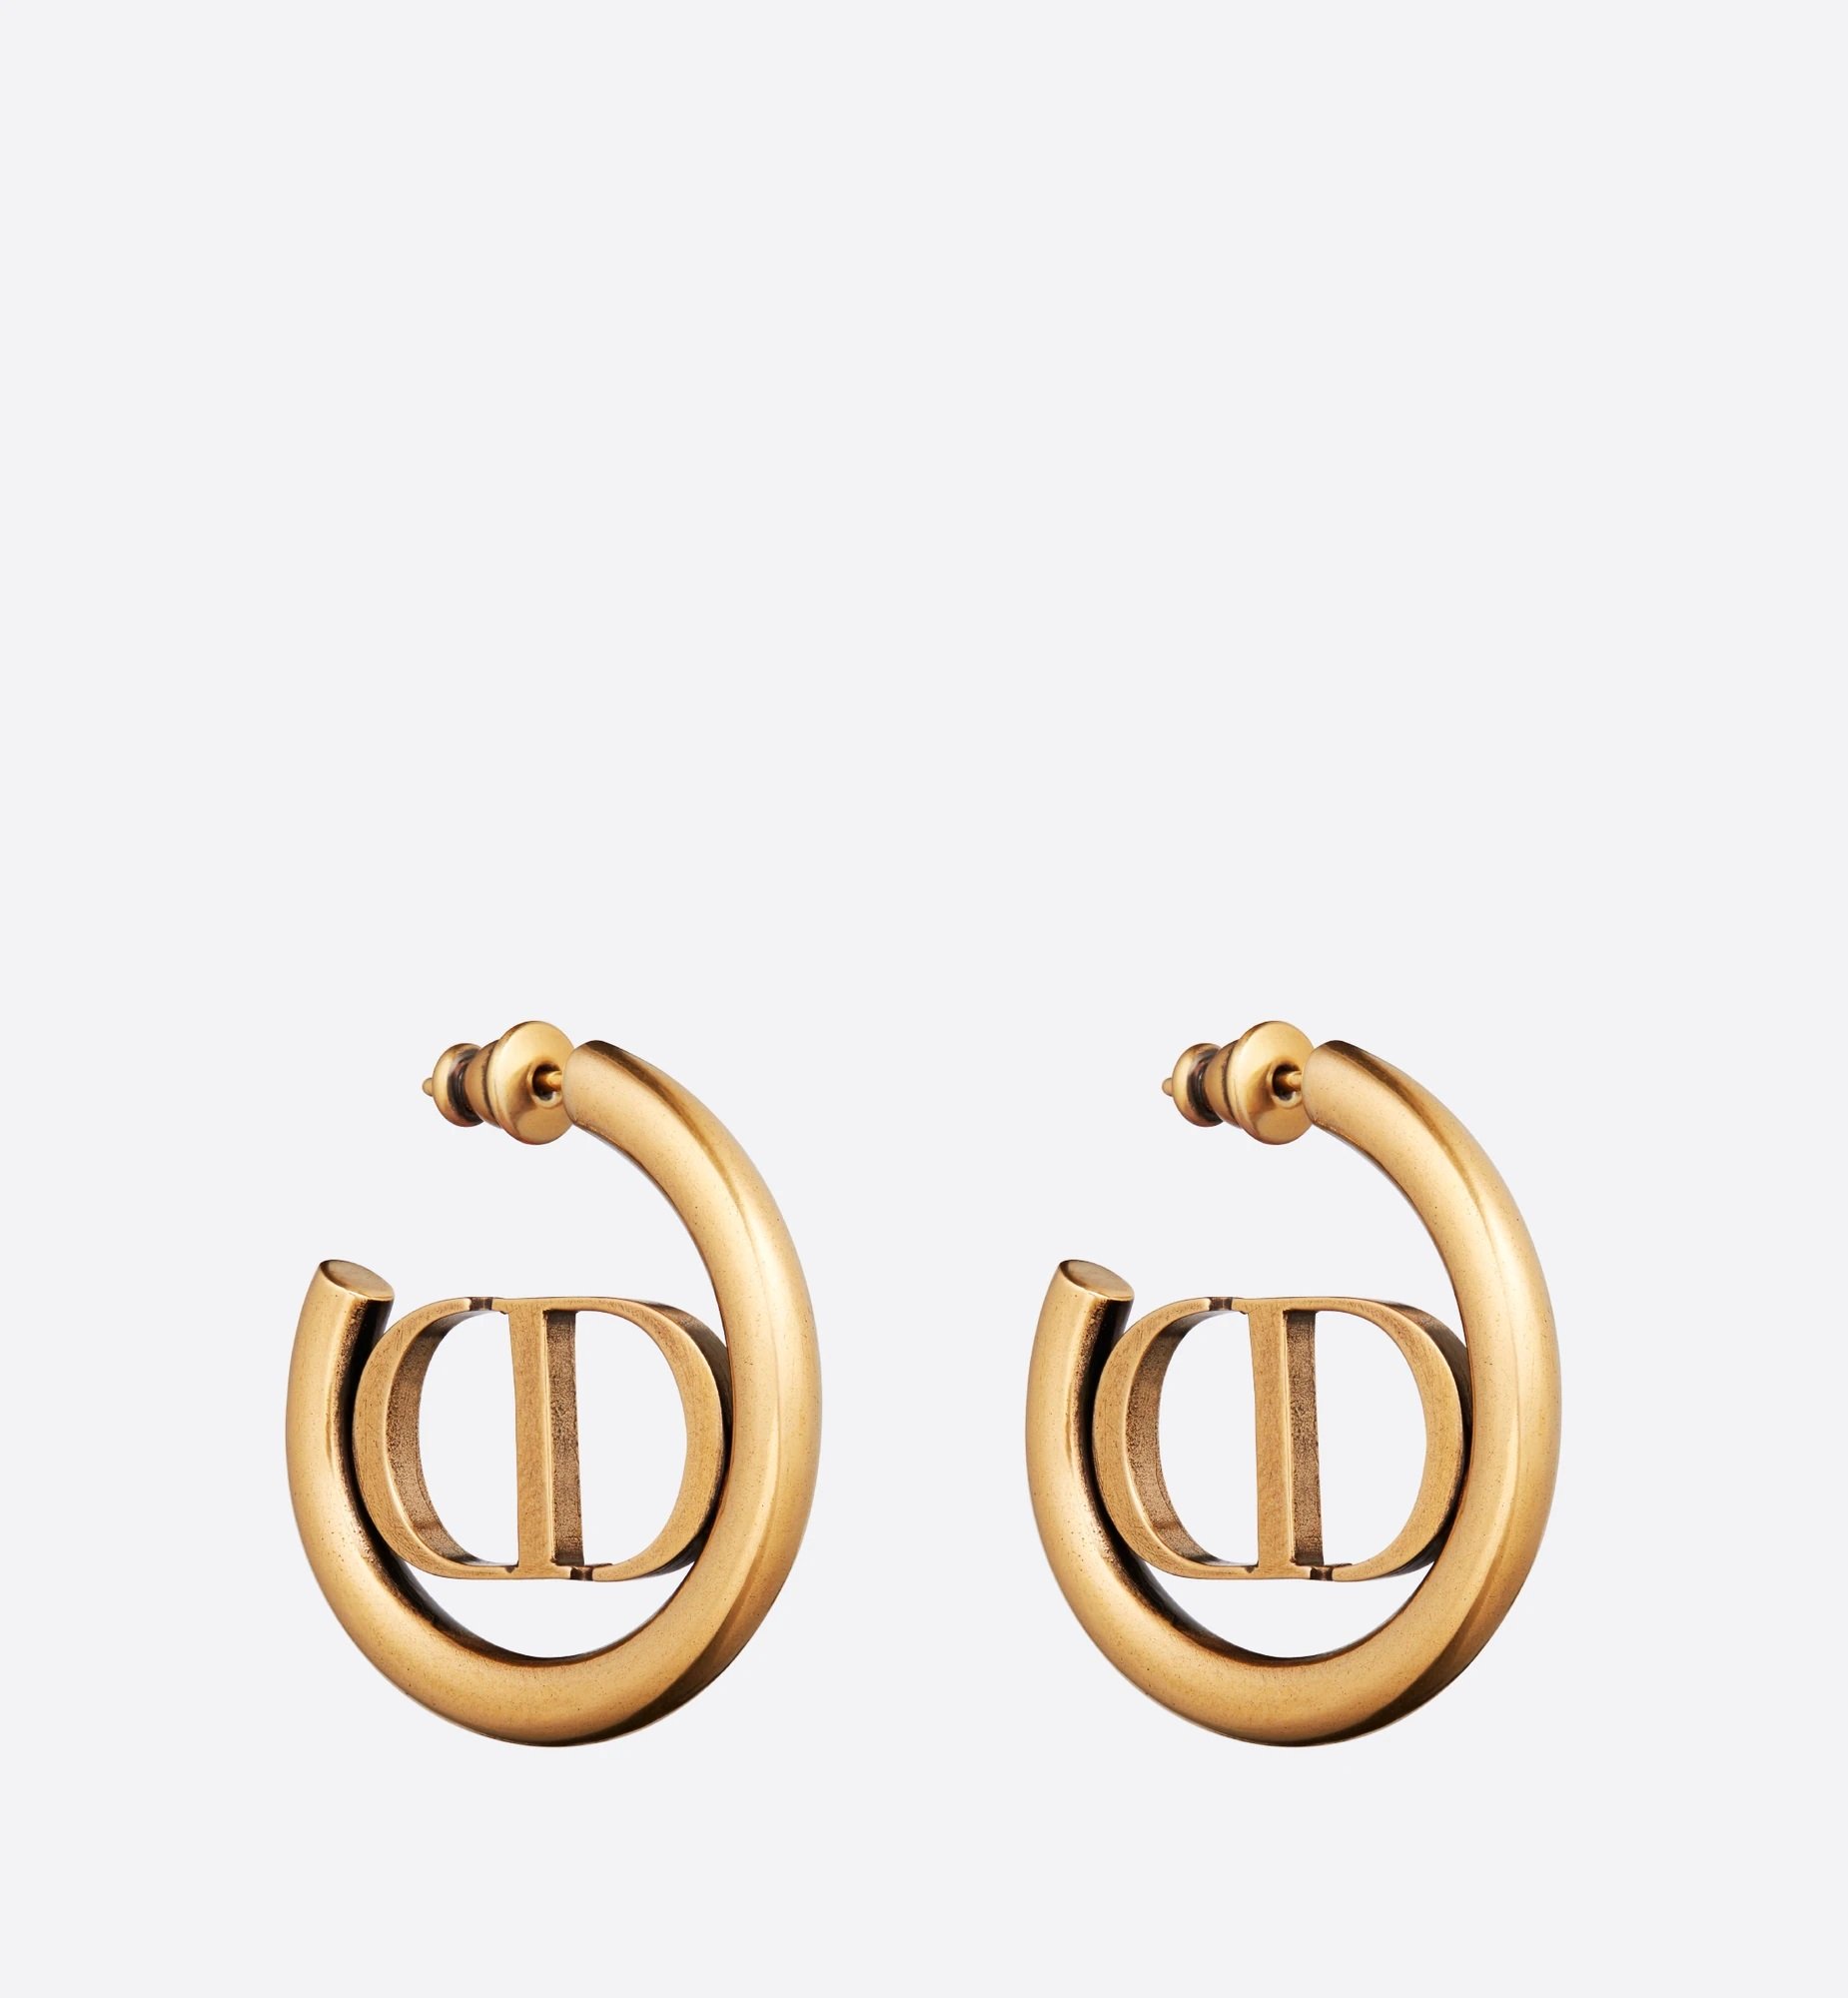 Christian Dior 30 Montaigne Hoop Earrings in Antique Gold-Finish Metal.jpg